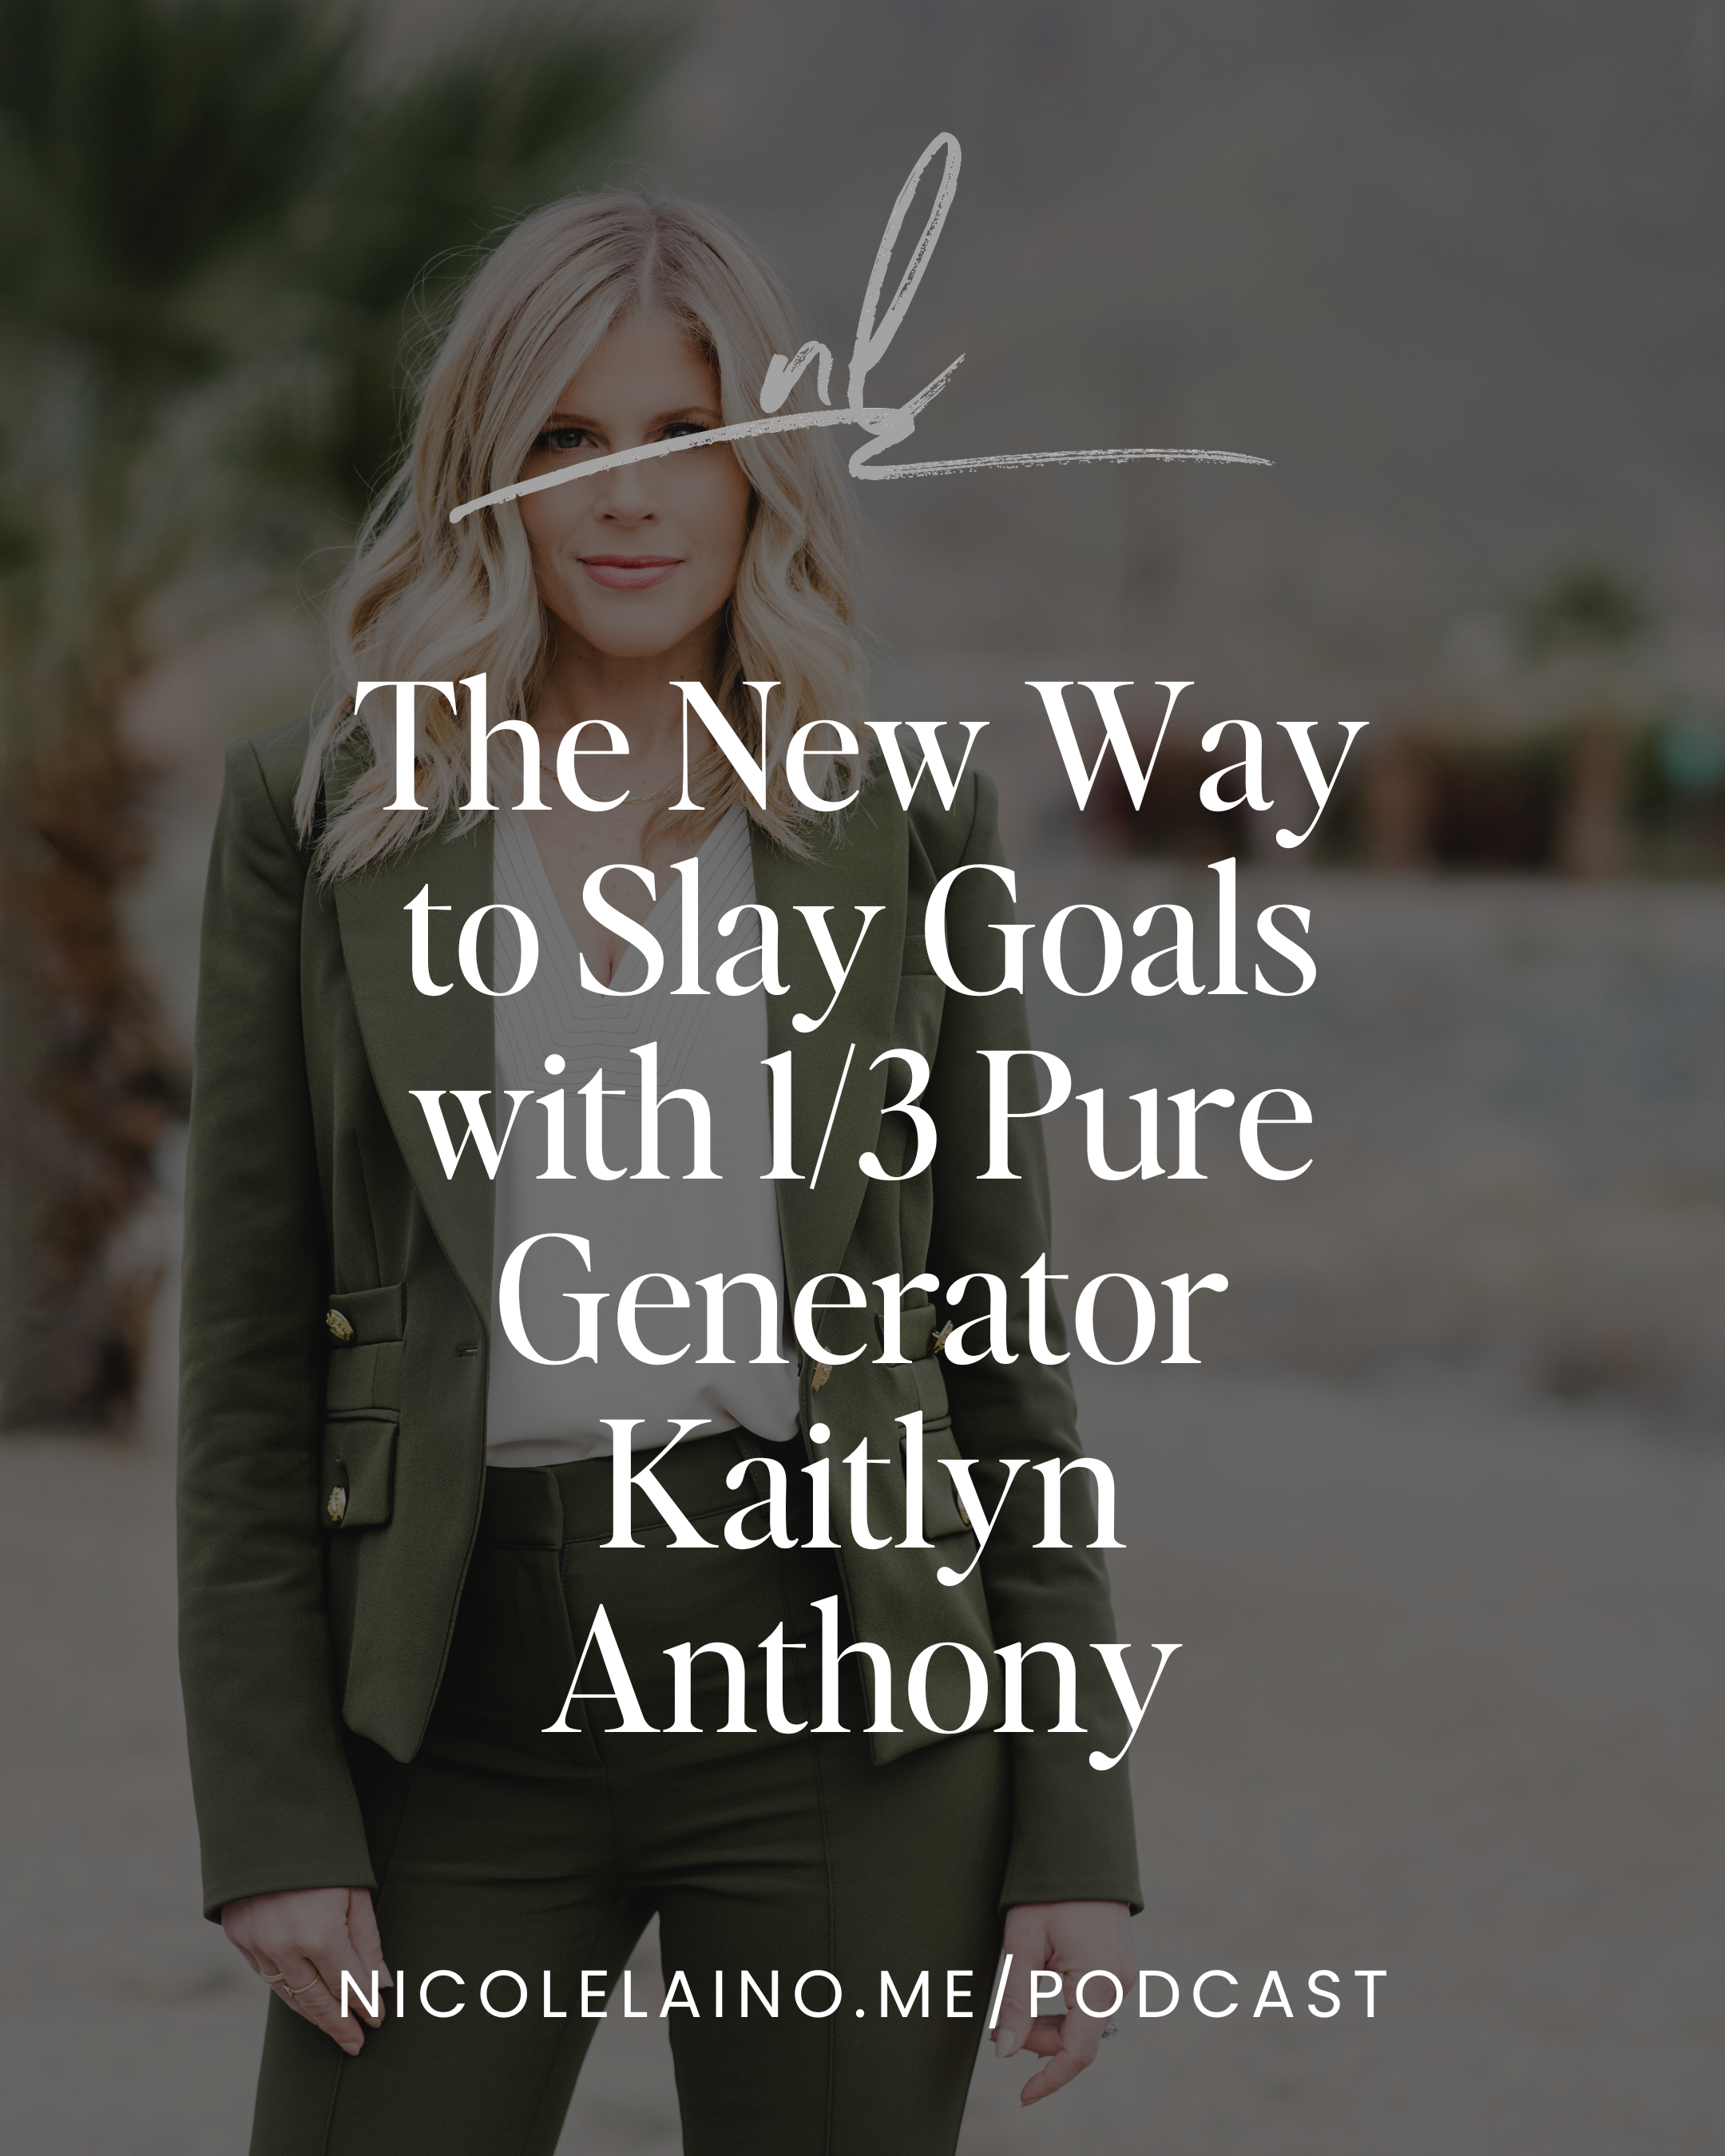 The New Way to Slay Goals with 1/3 Pure Generator Kaitlyn Anthony